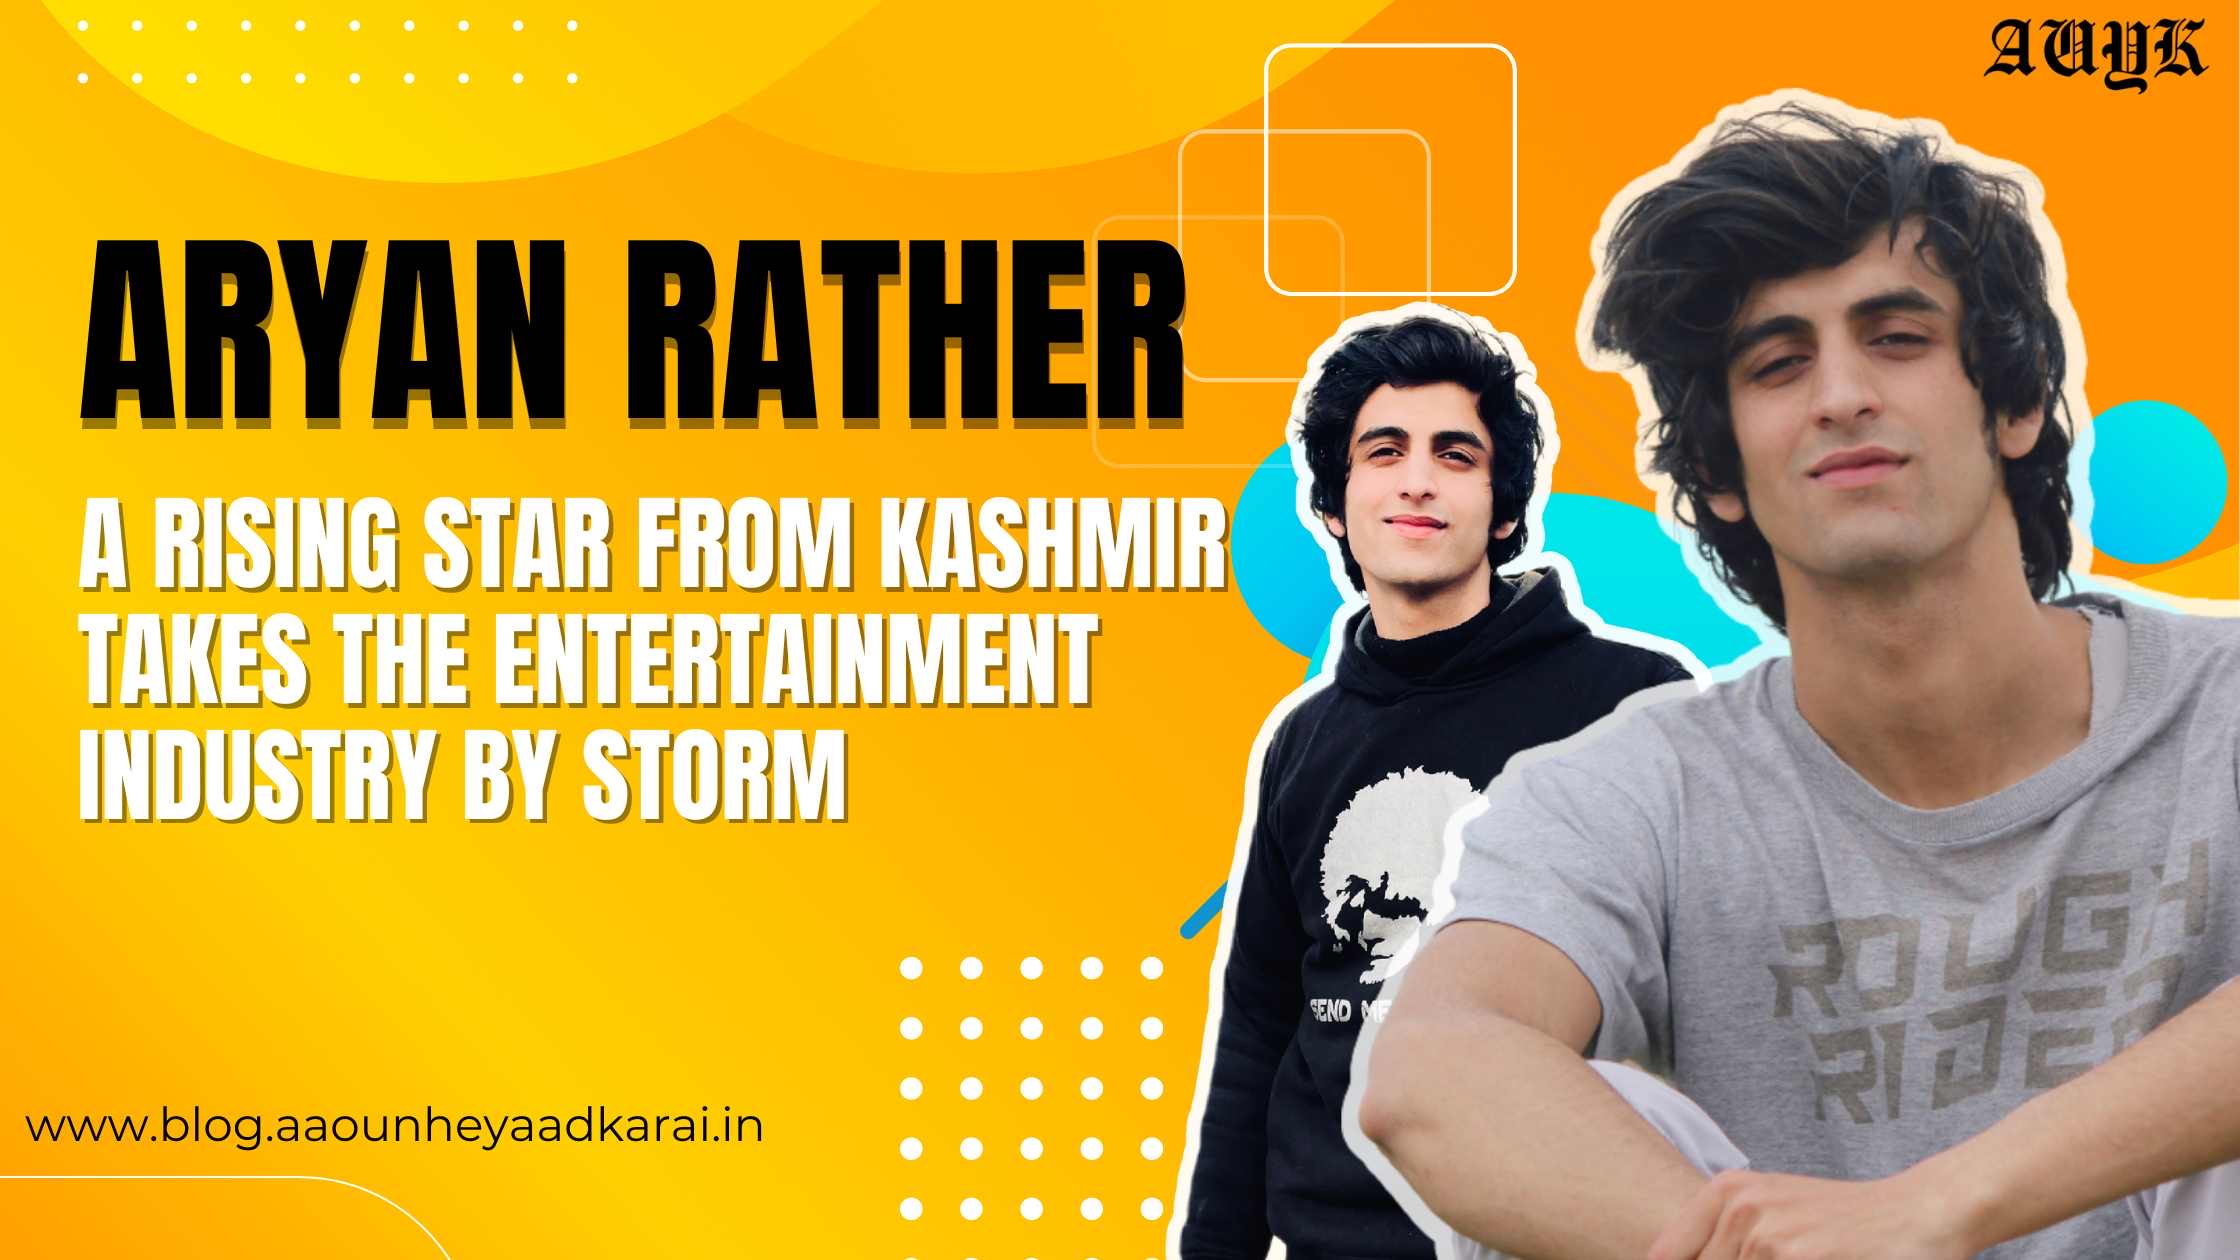 Aryan Rather Rising Star from Kashmir takes the Entertainment Industry by Storm